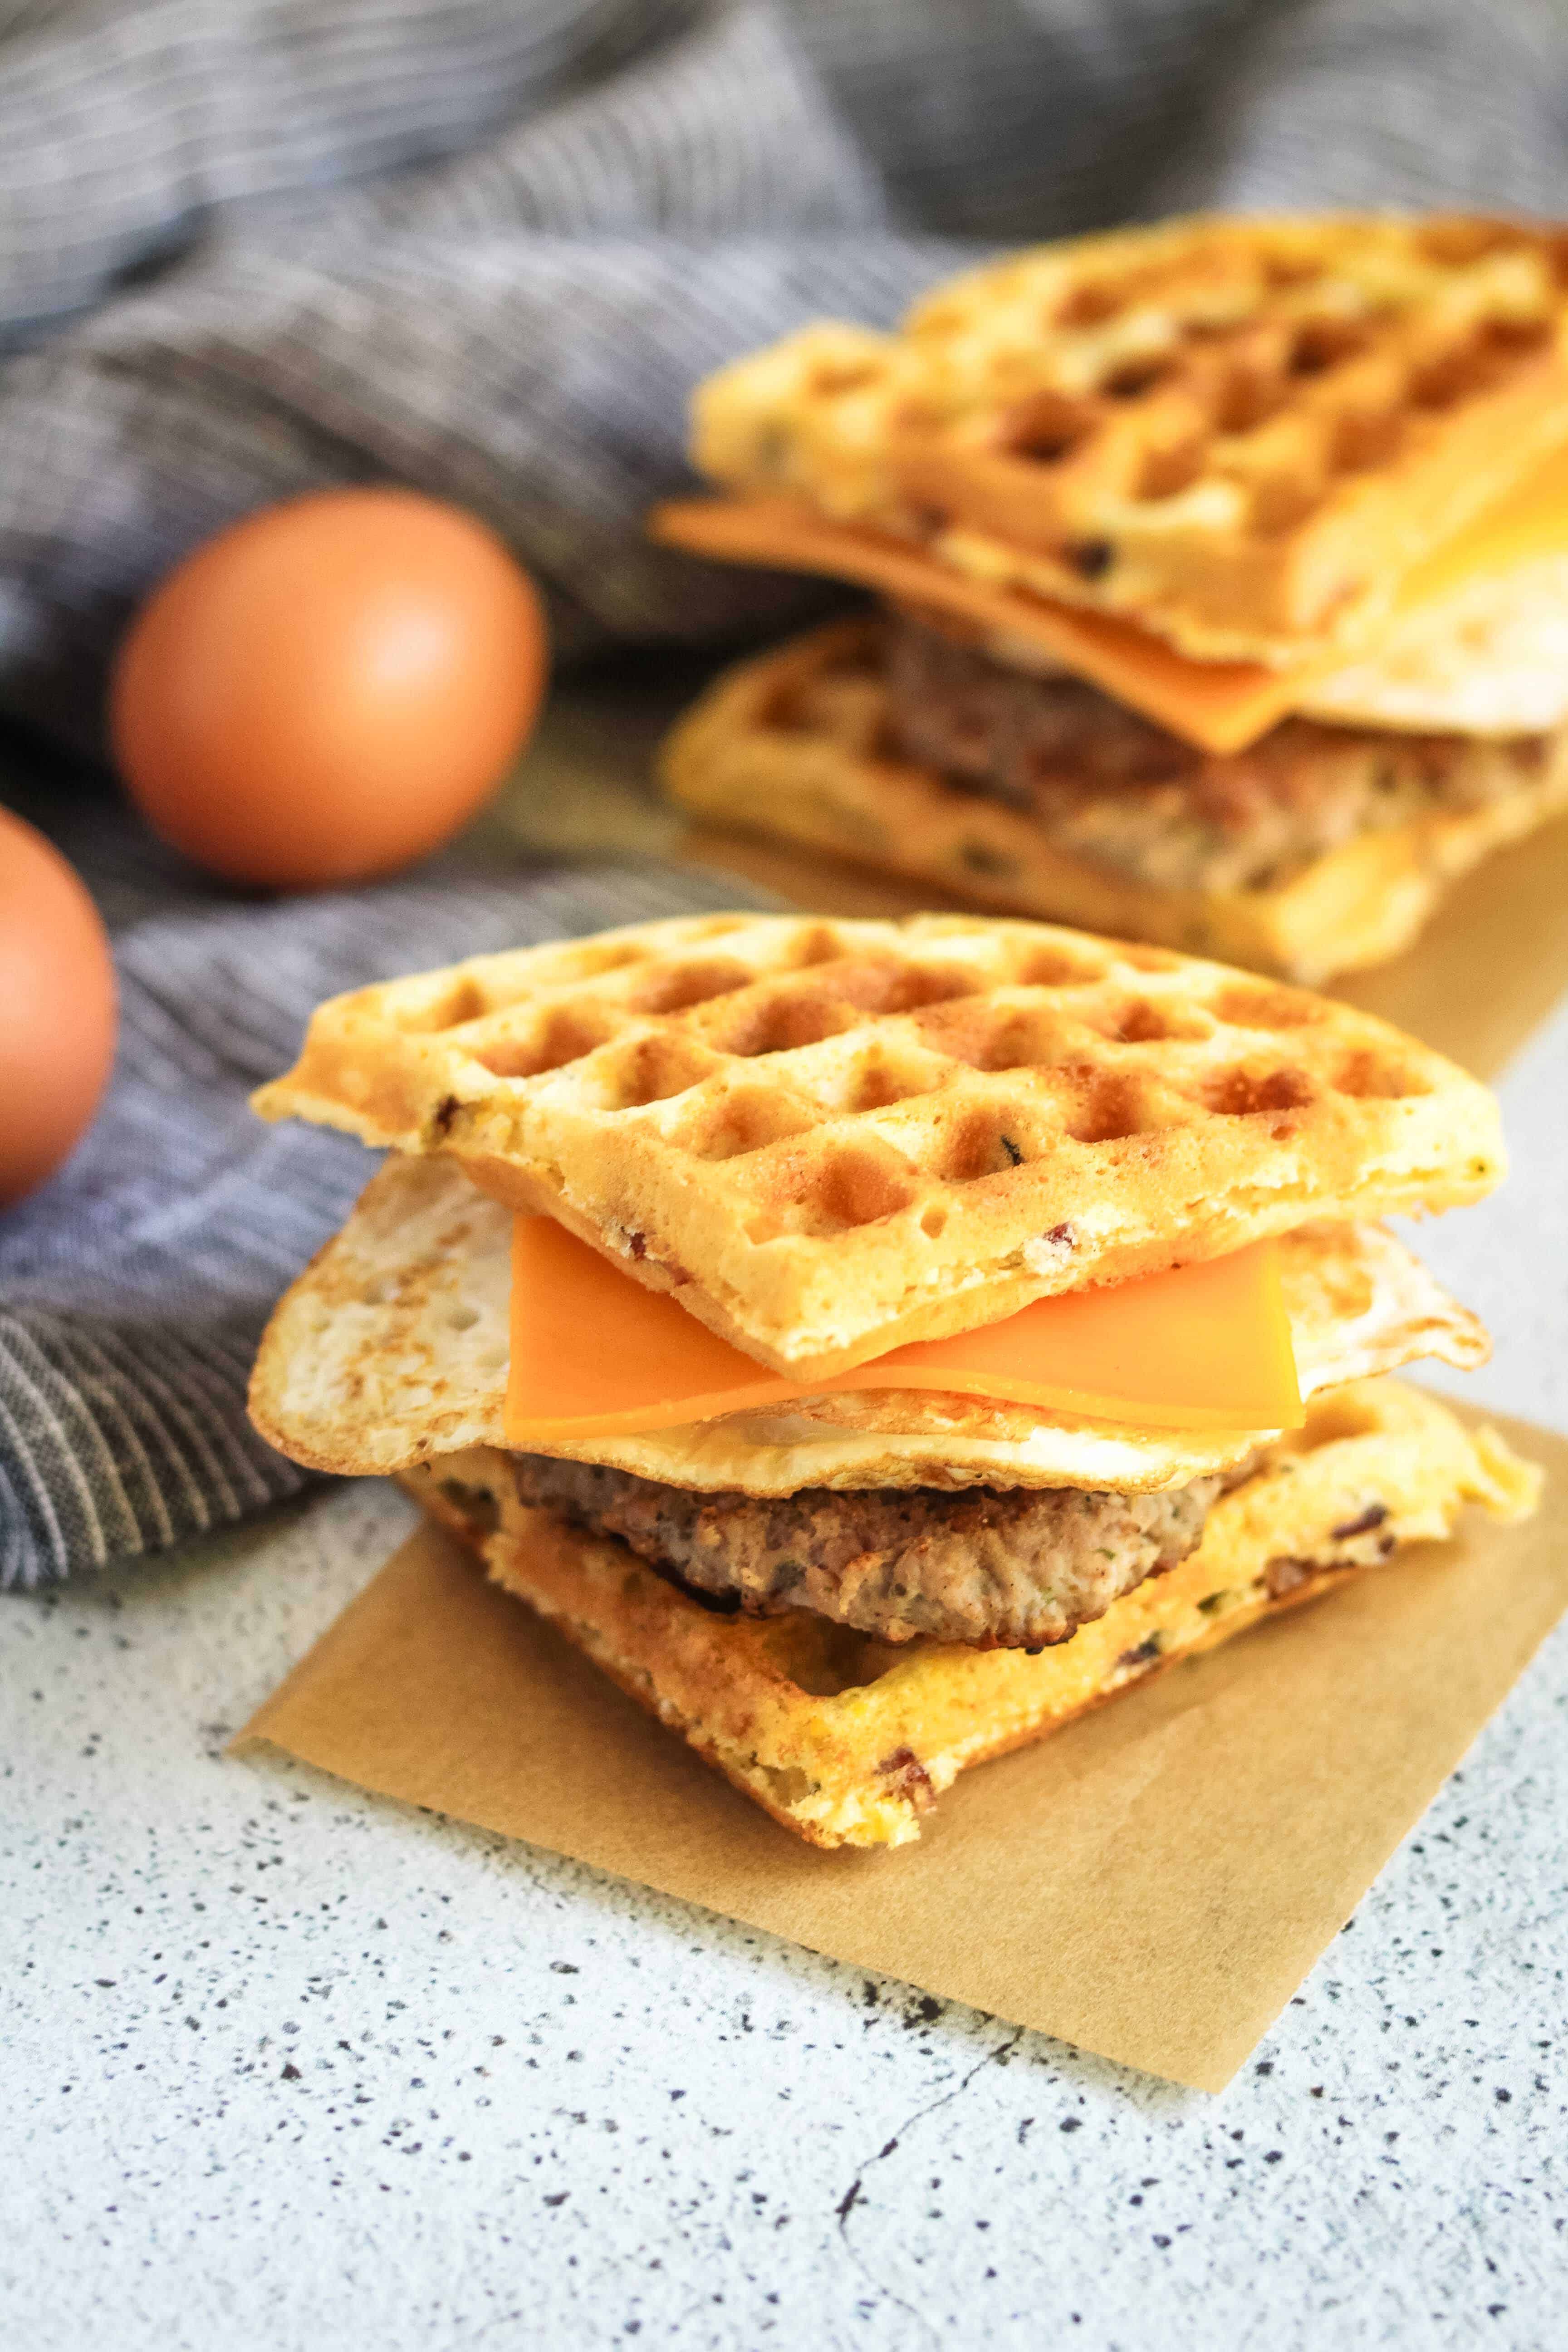 Sausage and Egg Waffle Sandwiches | Street Smart Nutrition